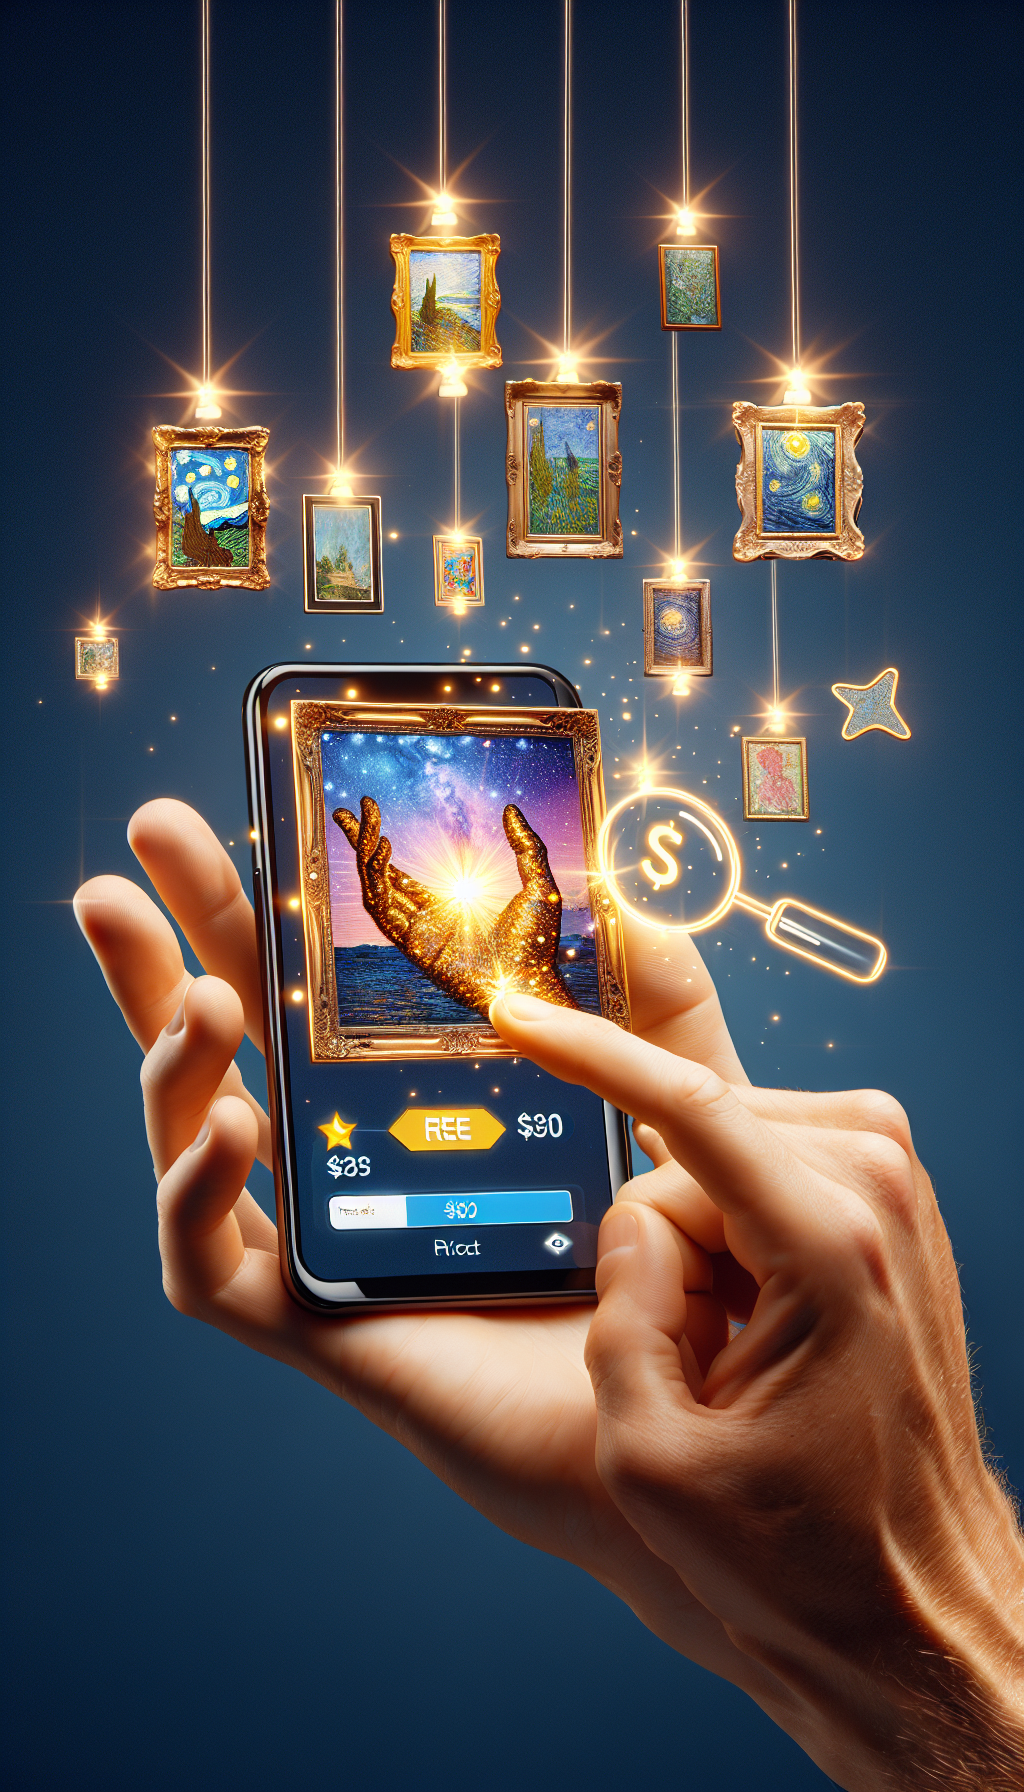 An illustration showcasing a hand extending from a smartphone screen, each fingertip adorned with a famous work of art—tiny, glowing price tags floating above them, all marked with a bold "$0". Gently resting on the screen is a magnifying glass app icon, signifying the freedom and ease of appraising art with a simple touch.